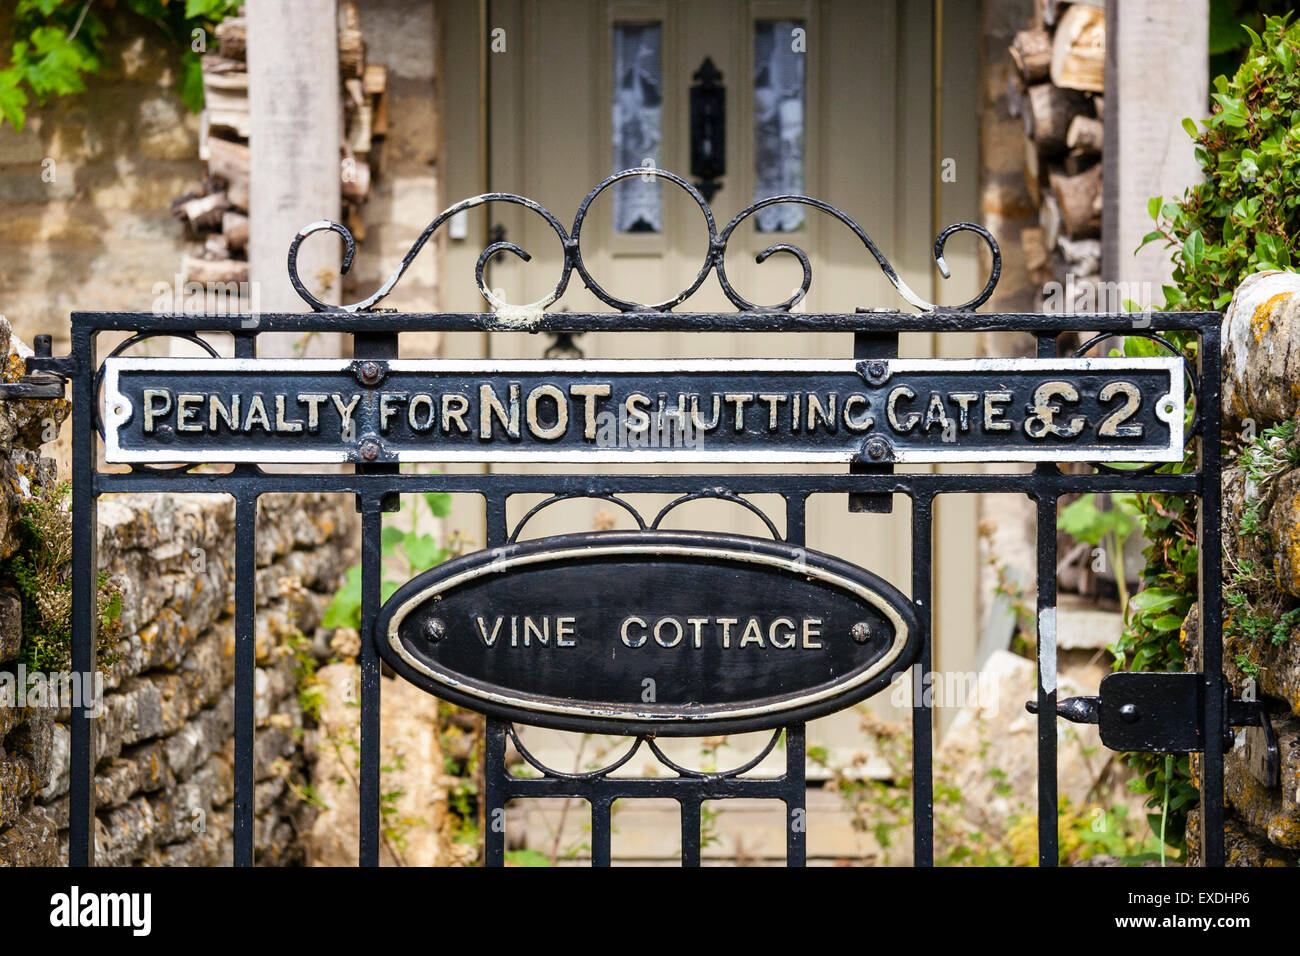 Rural English stone house 'Vine Cottage' in Cotswold village, Lower Slaughter, close up of gate and sign, Penalty for not shutting the gate £2 Stock Photo